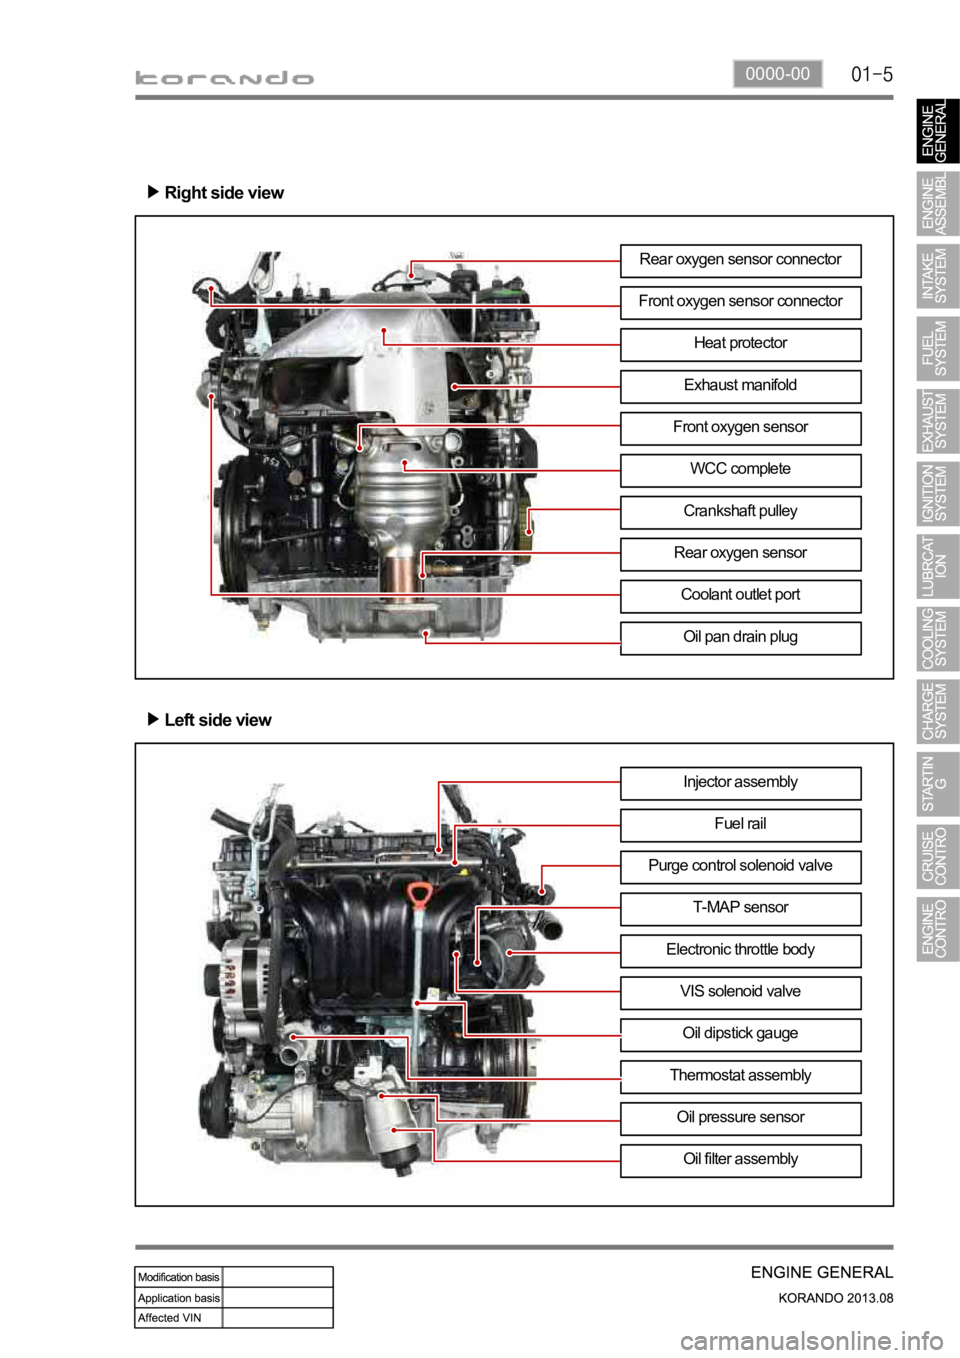 SSANGYONG KORANDO 2013  Service Manual 0000-00
Right side view
Left side view
Rear oxygen sensor connector
Front oxygen sensor connector
Exhaust manifoldHeat protector
Front oxygen sensor
WCC complete
Crankshaft pulley
Oil pan drain plug
R